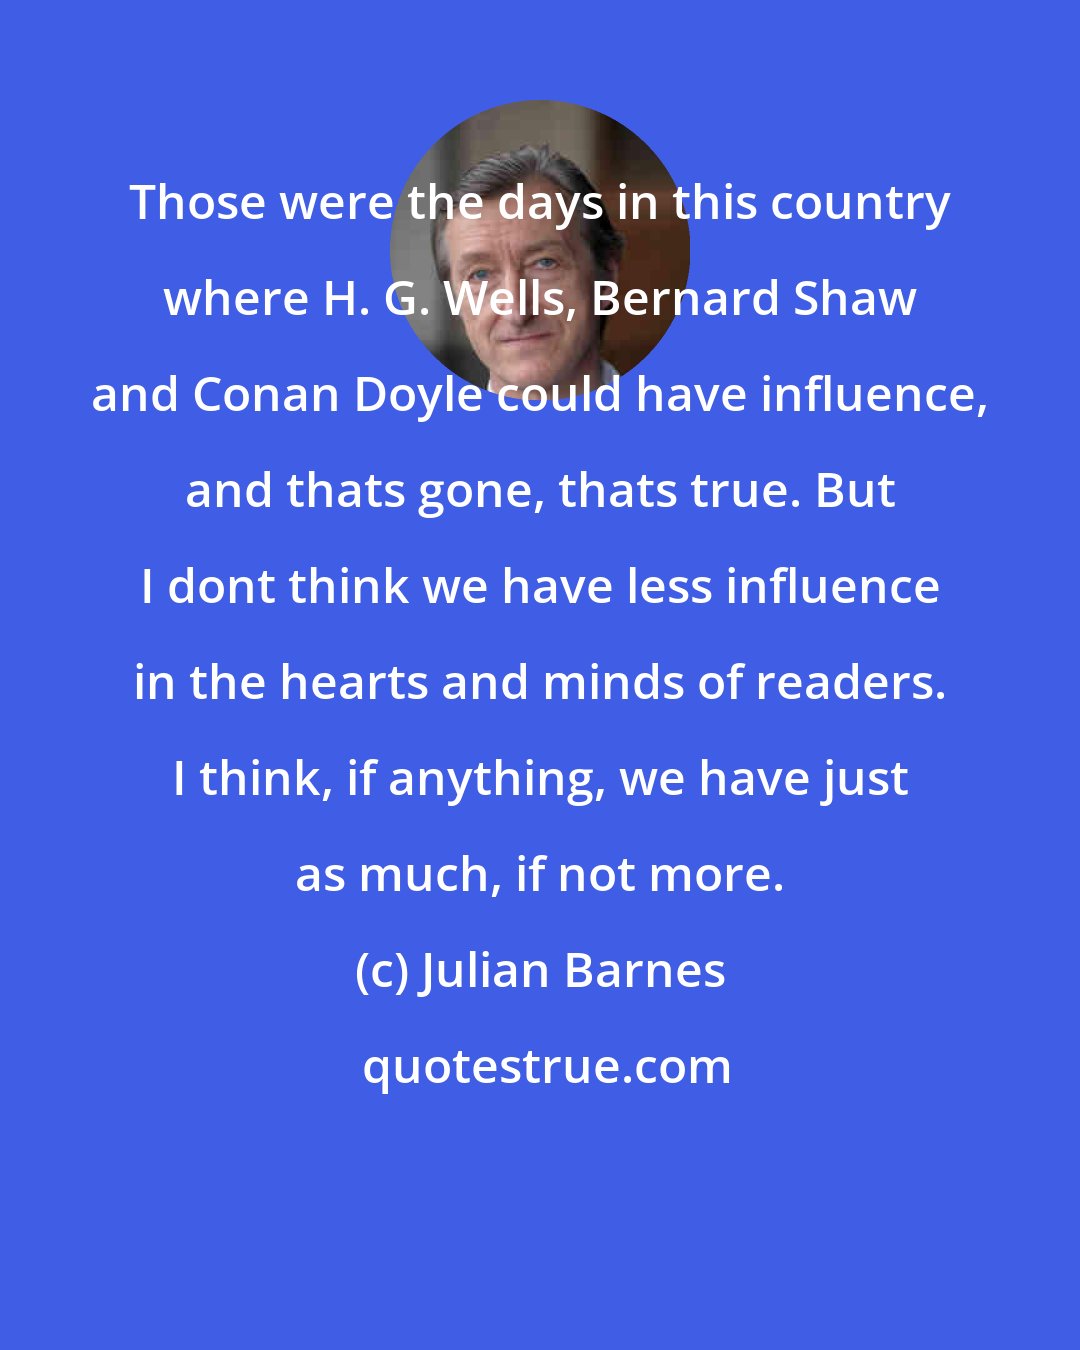 Julian Barnes: Those were the days in this country where H. G. Wells, Bernard Shaw and Conan Doyle could have influence, and thats gone, thats true. But I dont think we have less influence in the hearts and minds of readers. I think, if anything, we have just as much, if not more.